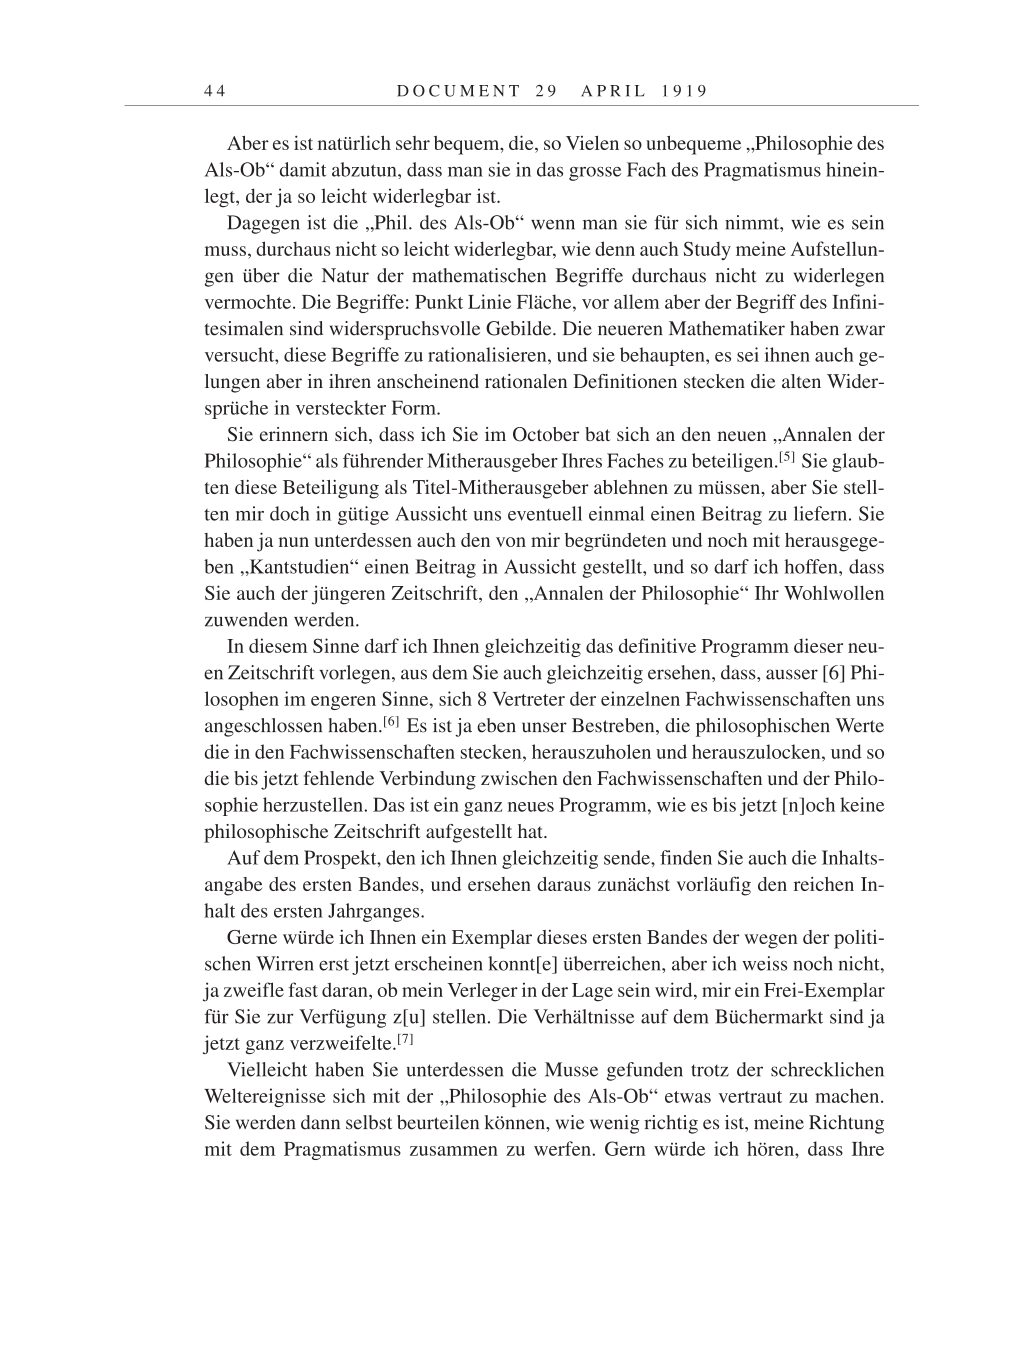 Volume 9: The Berlin Years: Correspondence January 1919-April 1920 page 44